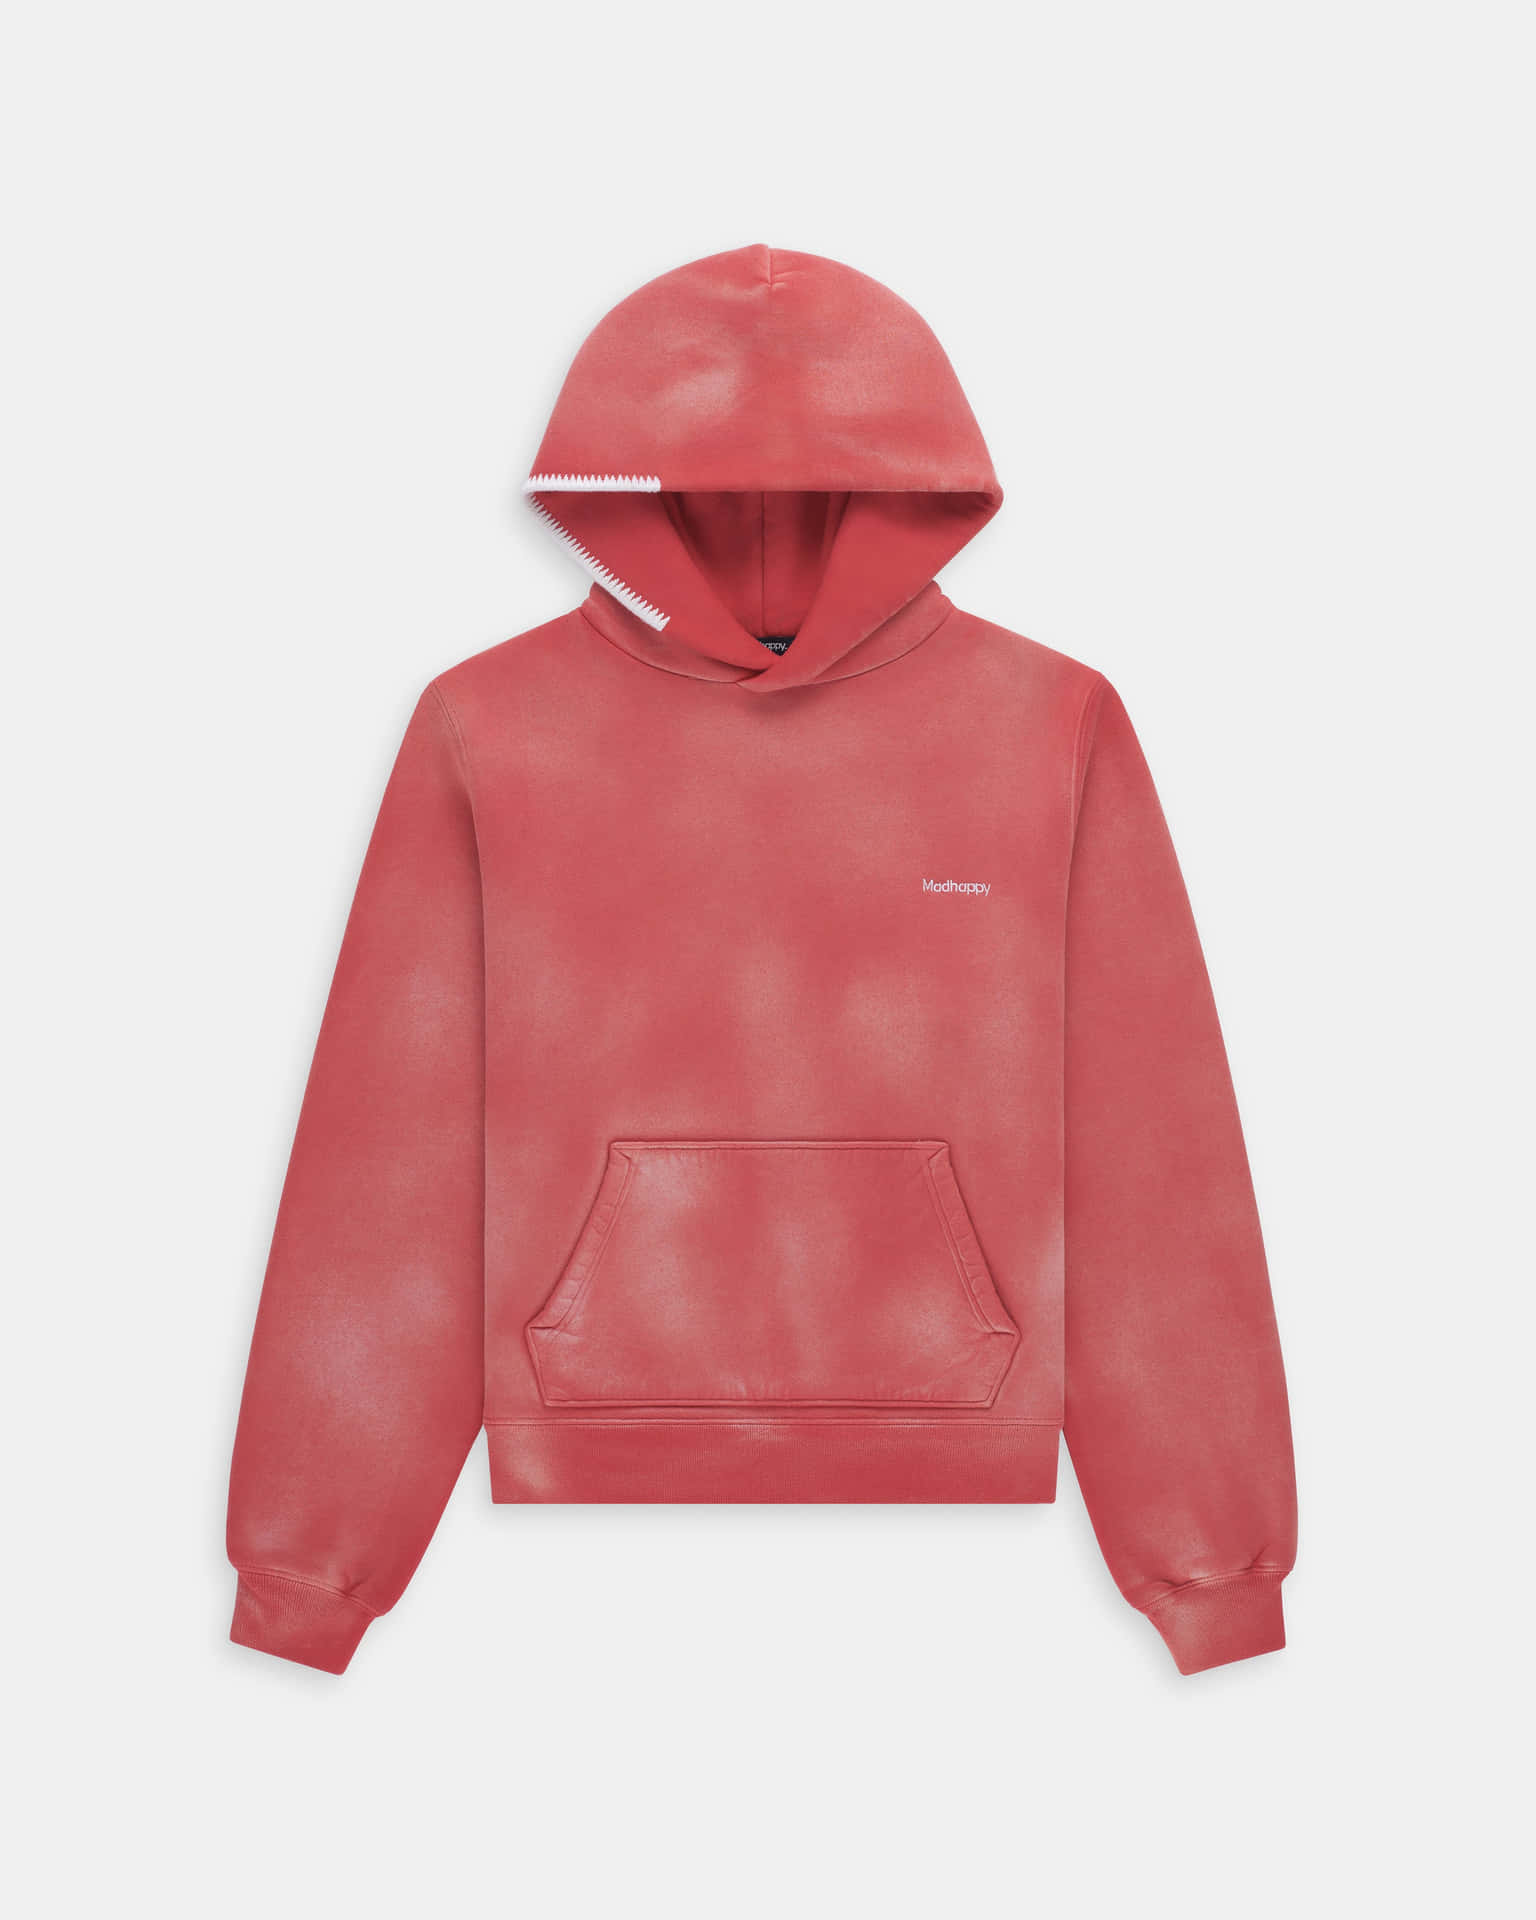 Person Wearing a Red Hoodie Wallpaper